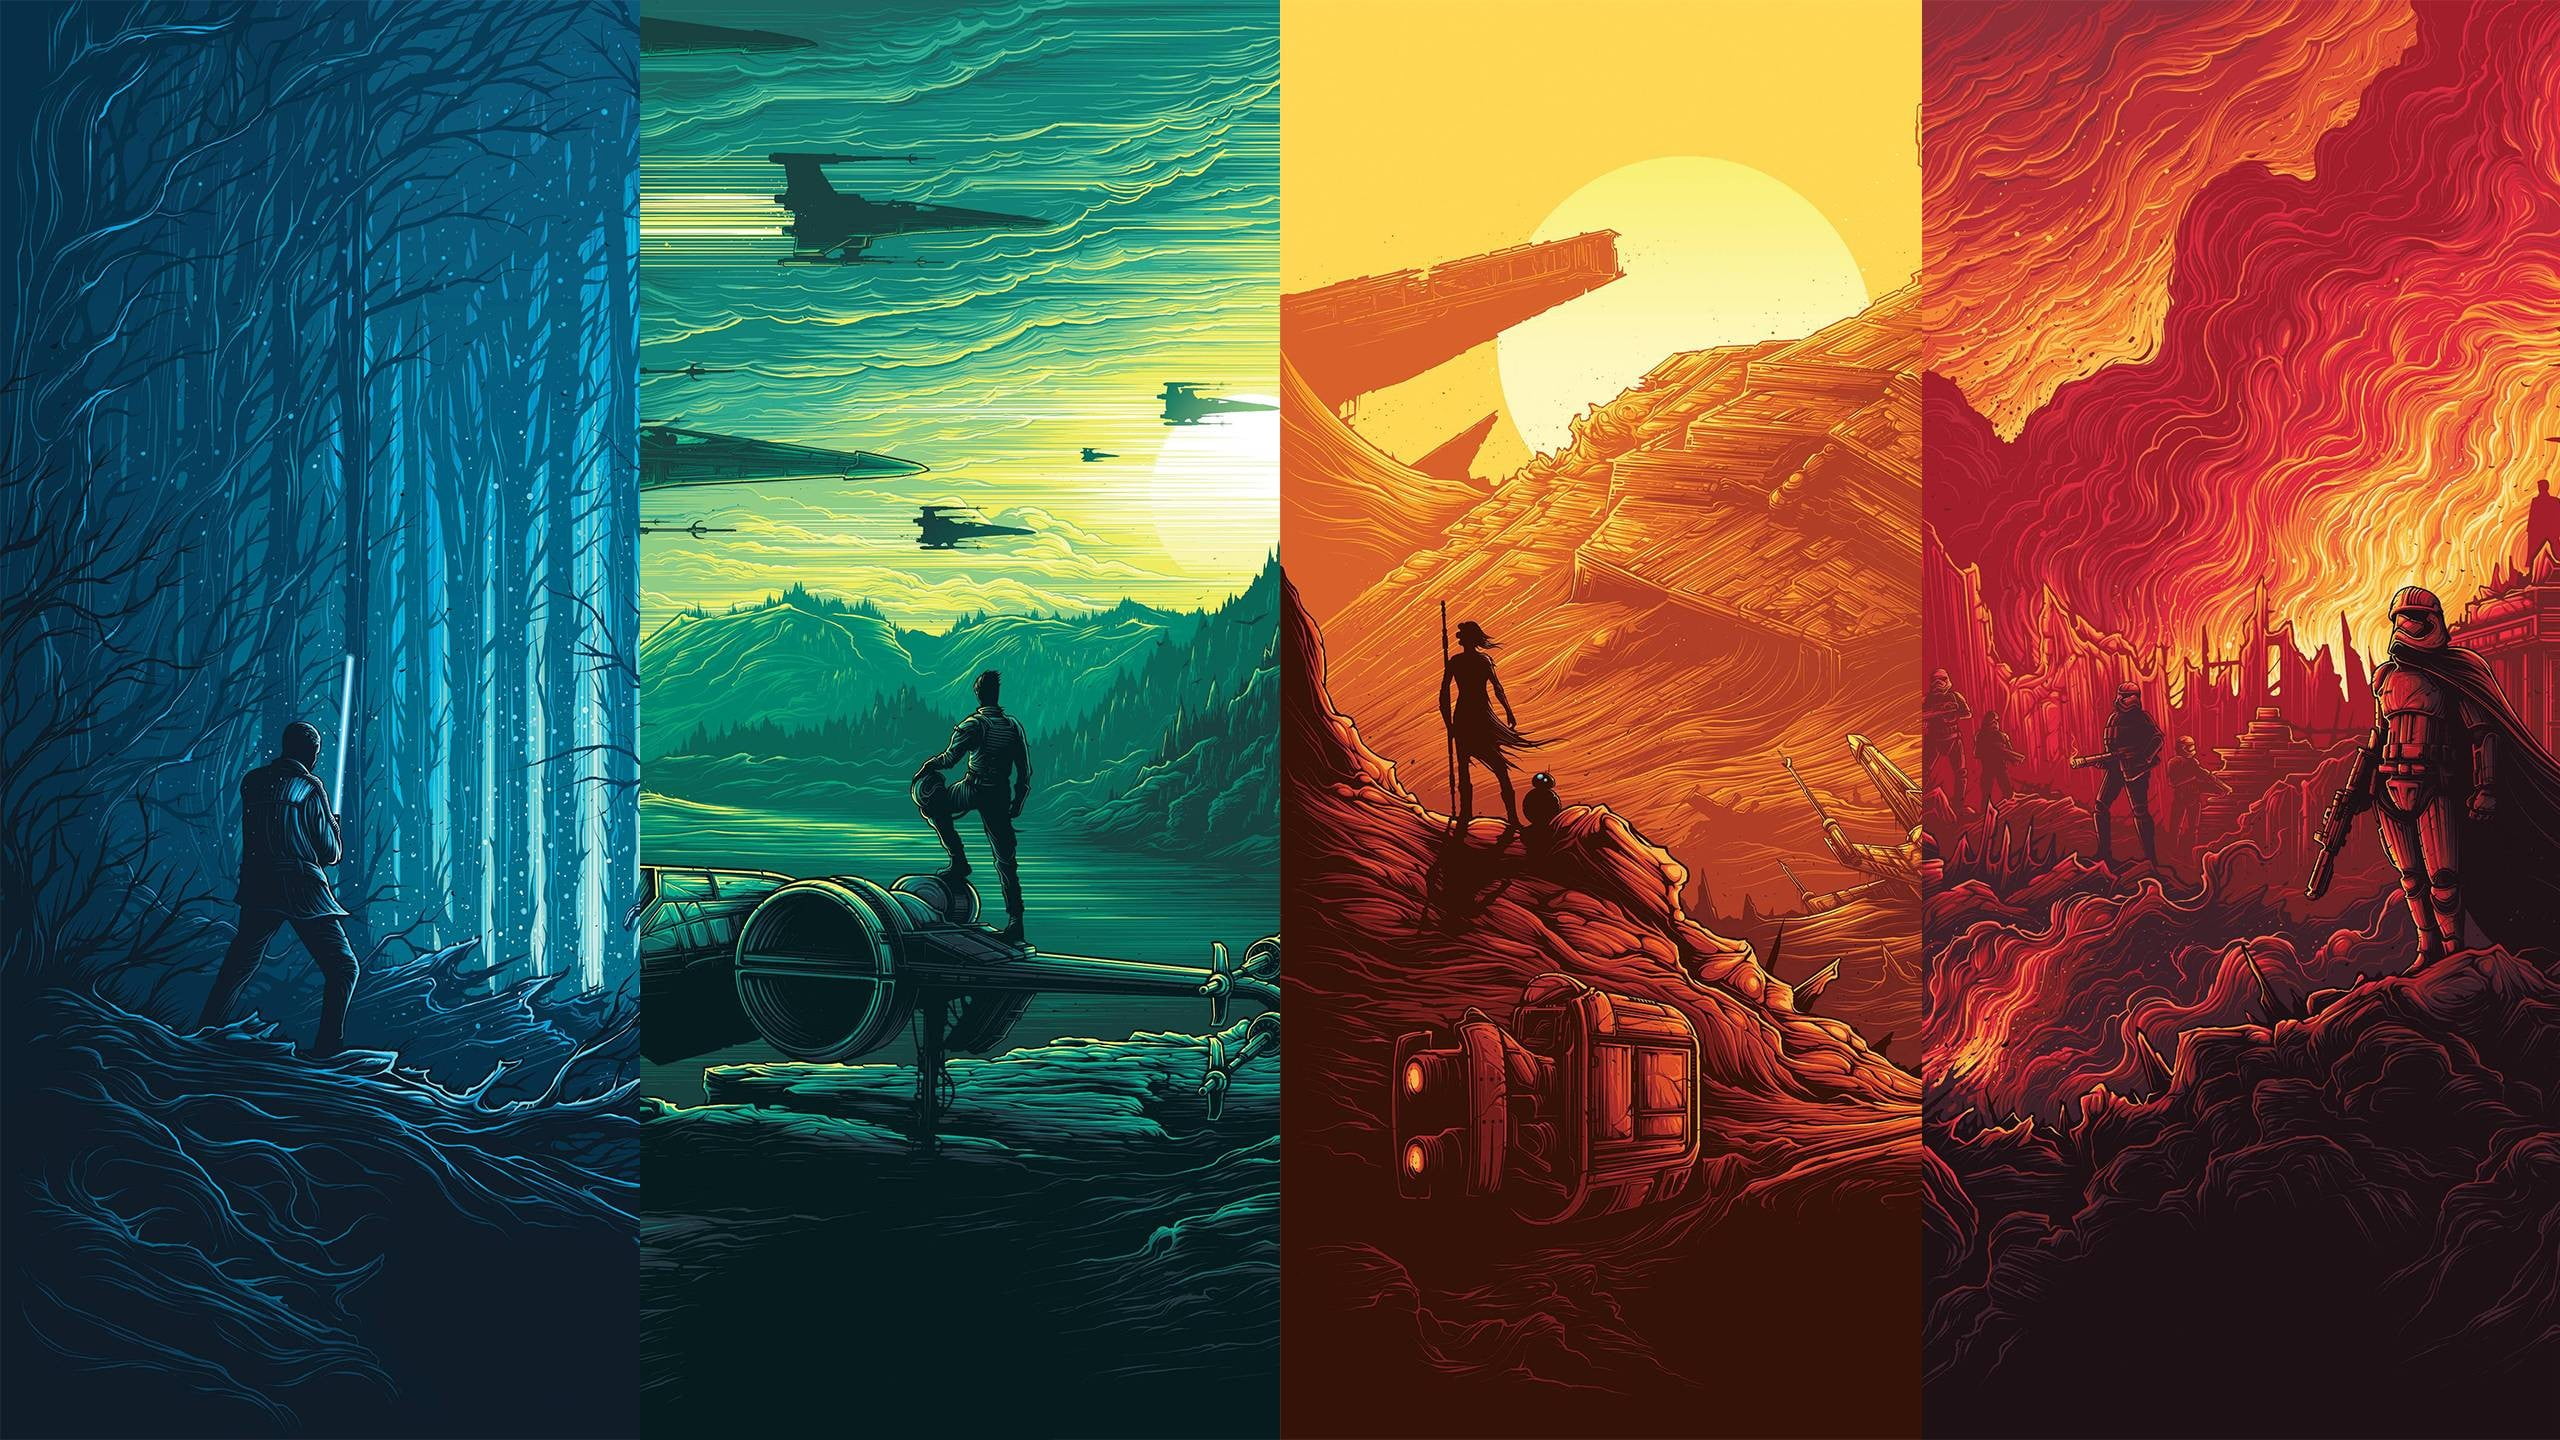 Star Wars wallpaper, Star Wars: The Force Awakens, collage, vector